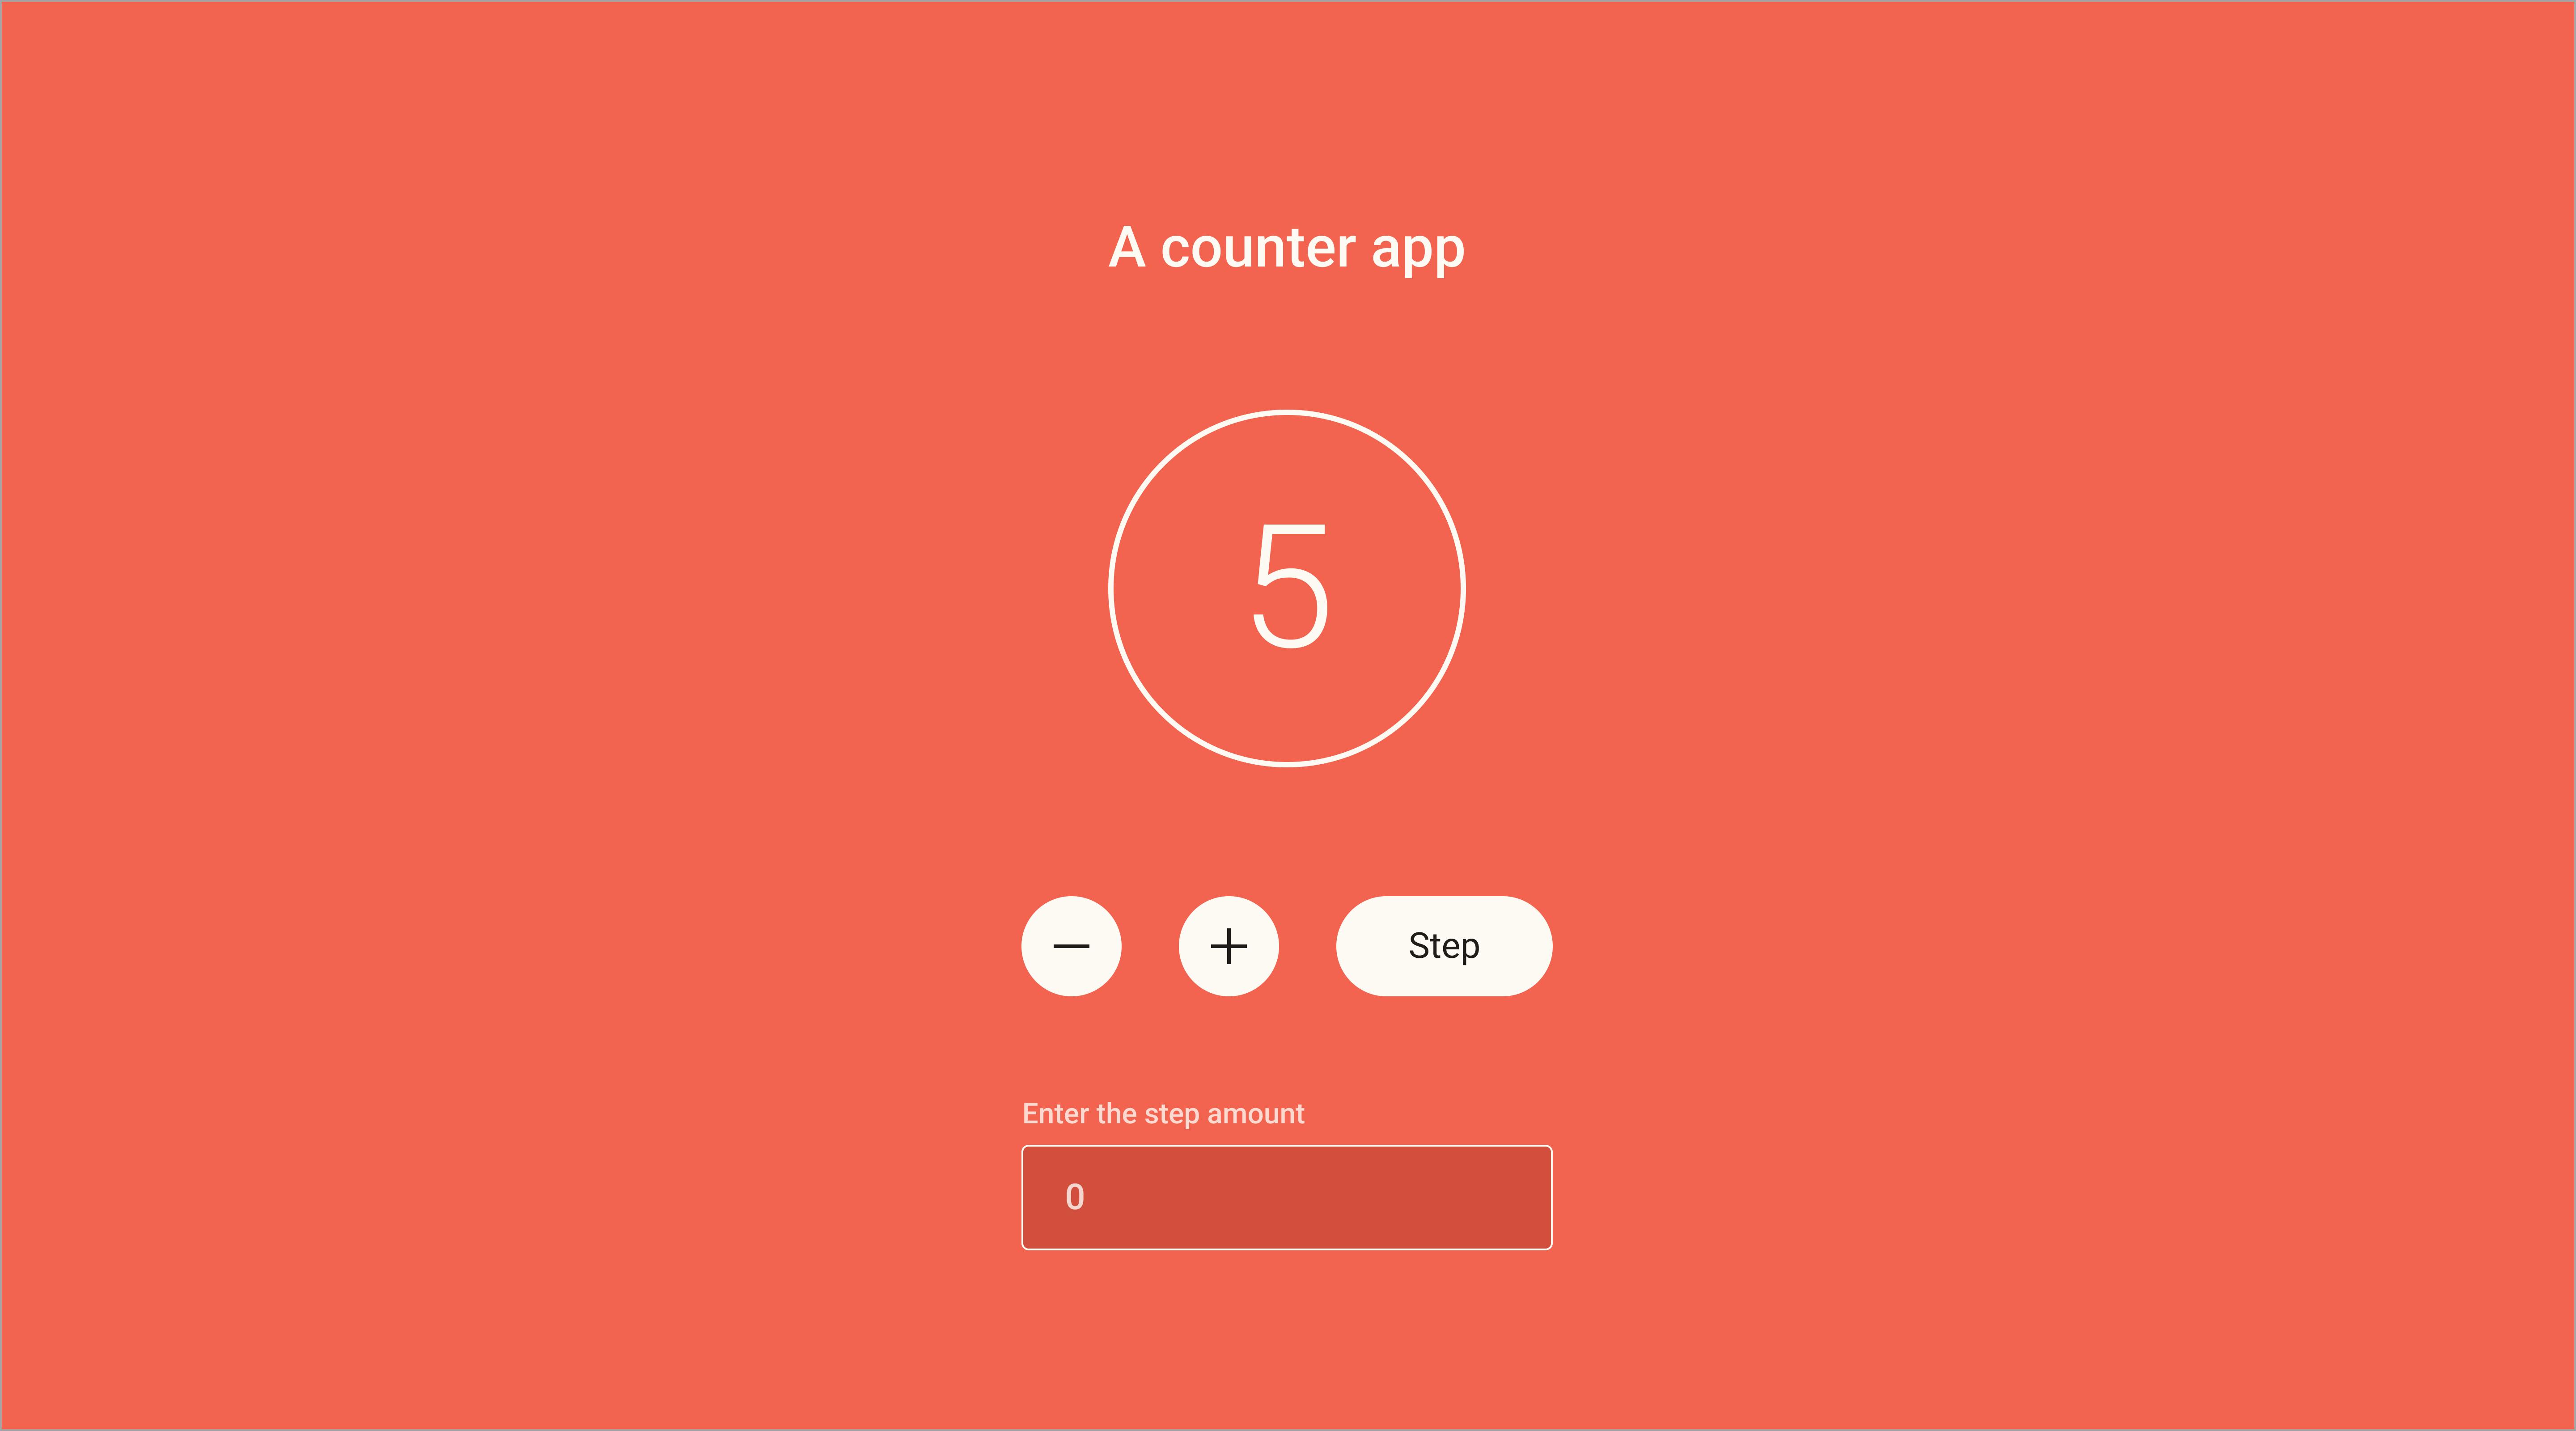 The UI of a counter application